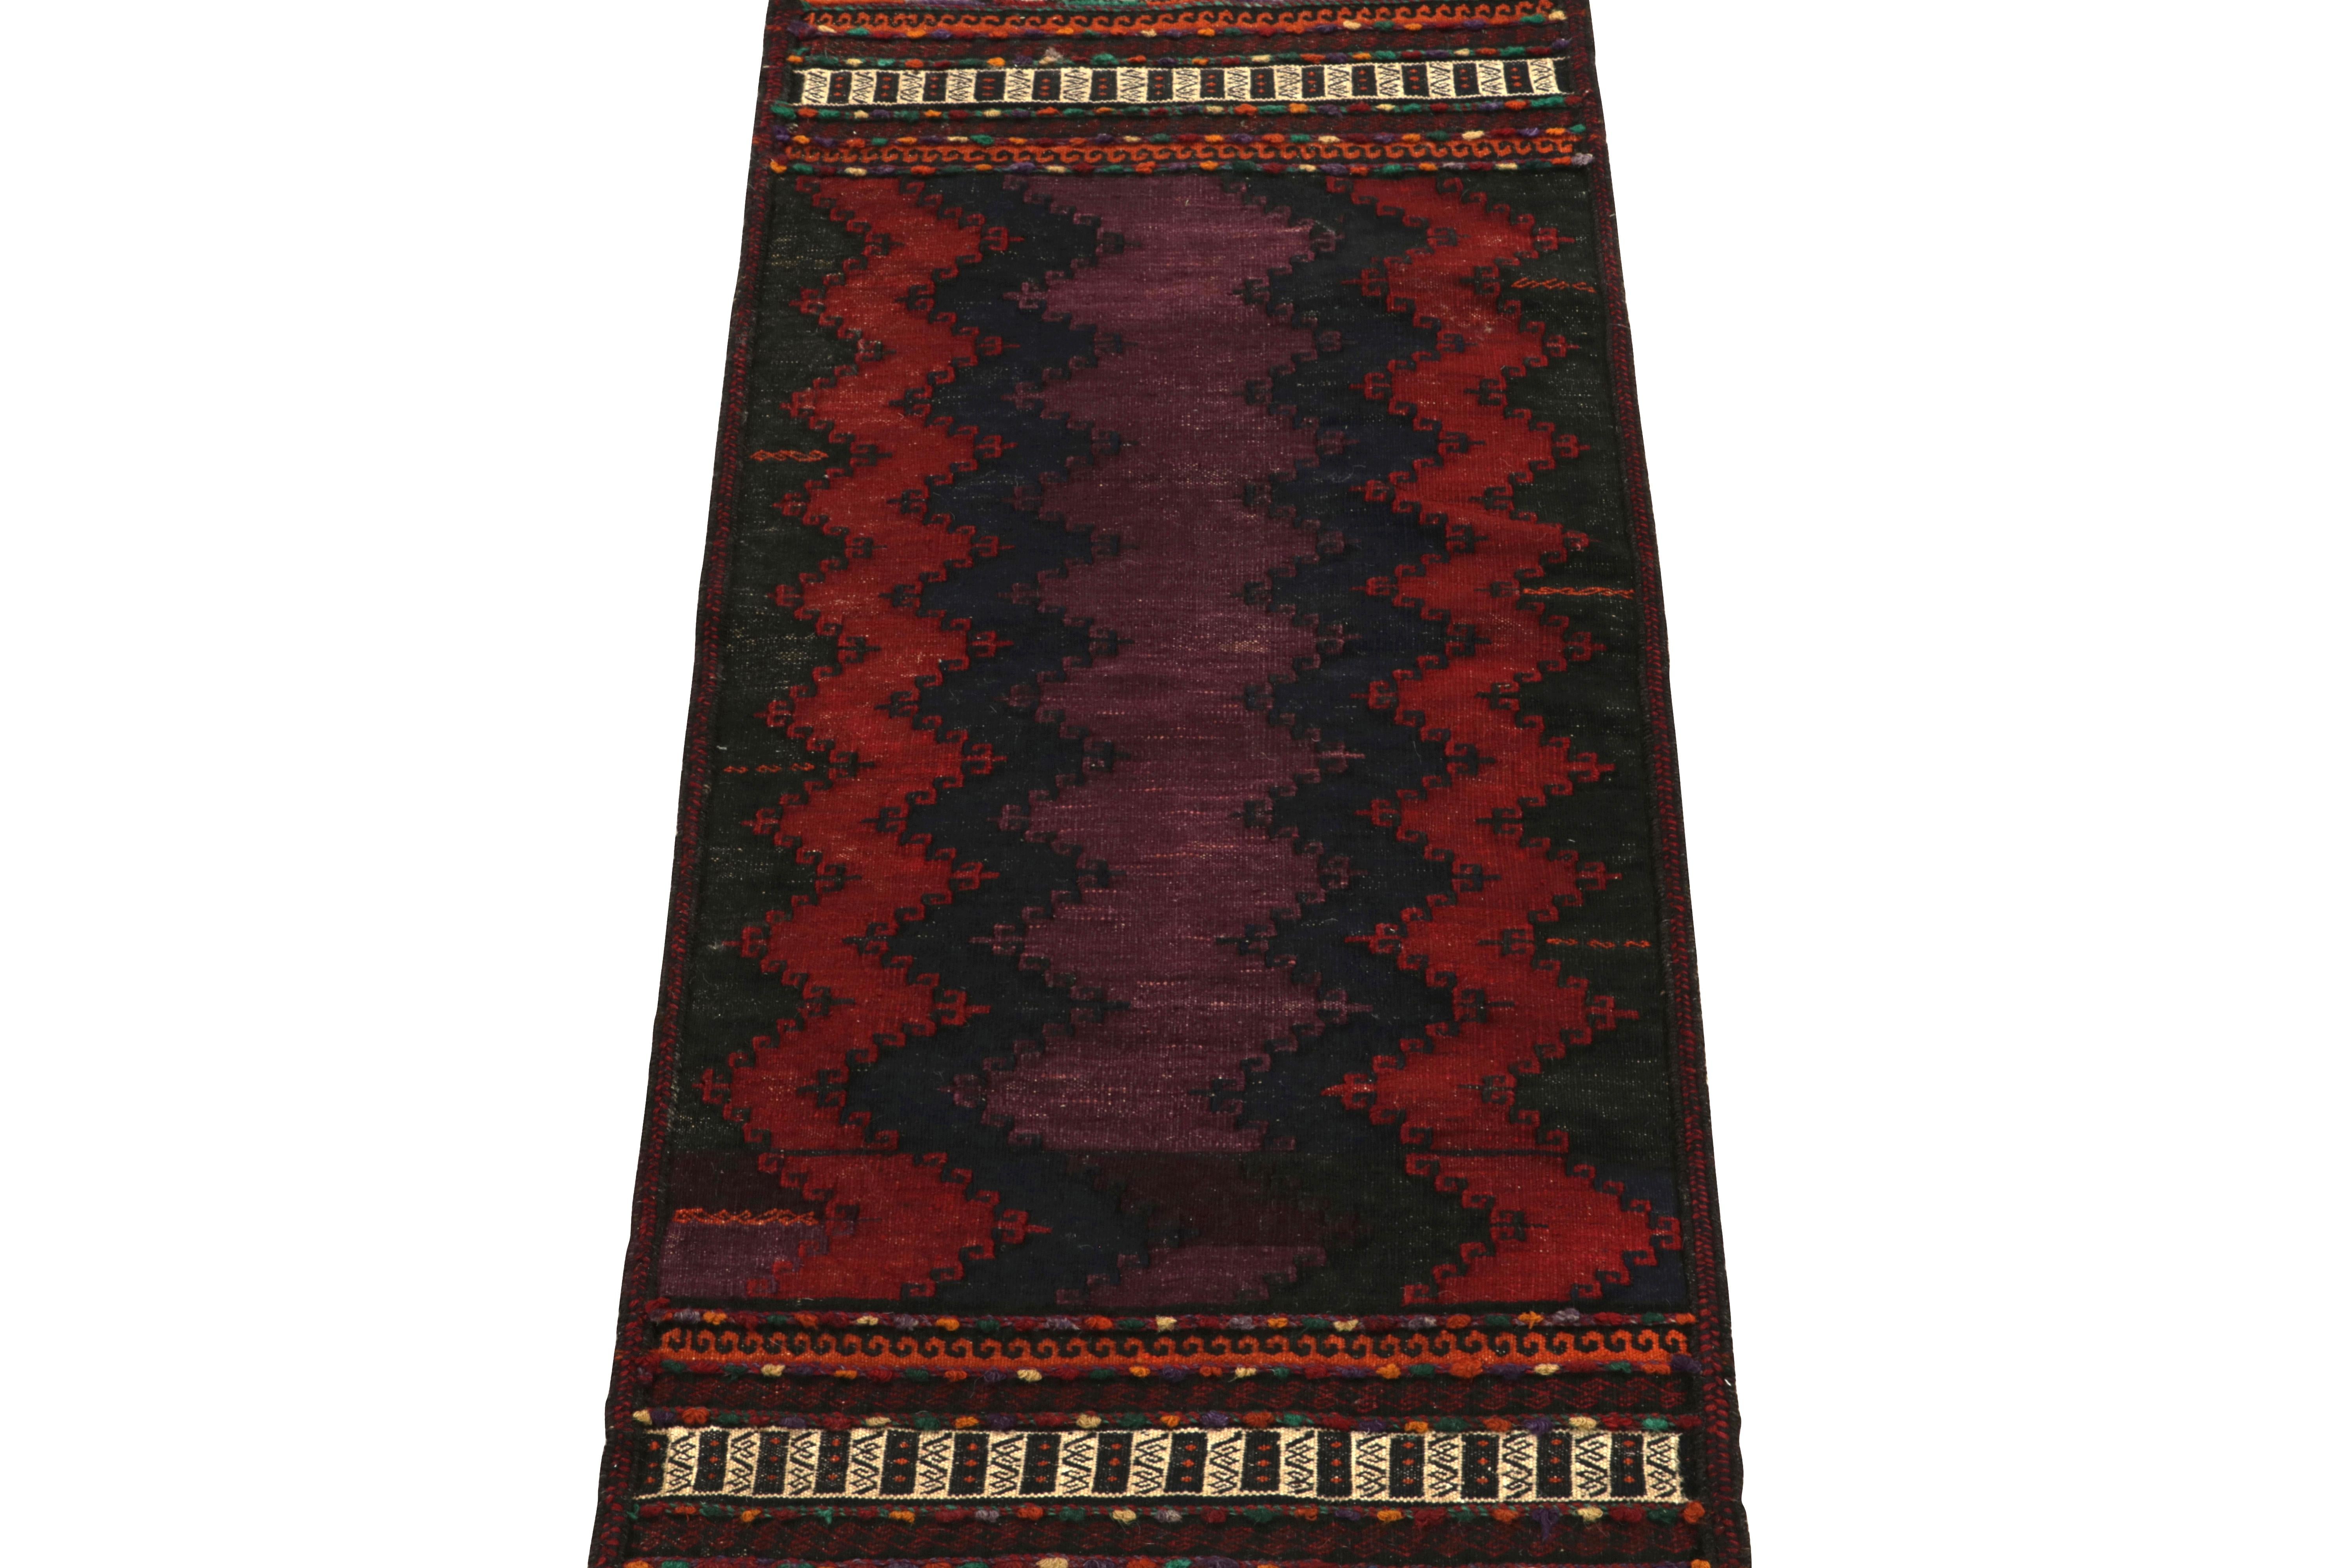 Handwoven in wool circa 1940-1950, a rare vintage kilim rug originating from Turkey carrying rich mid-century aesthetics. 

Second to none in collectible tribal inspiration, this 2x5 flatweave witnesses a marriage of hook and horn motifs &